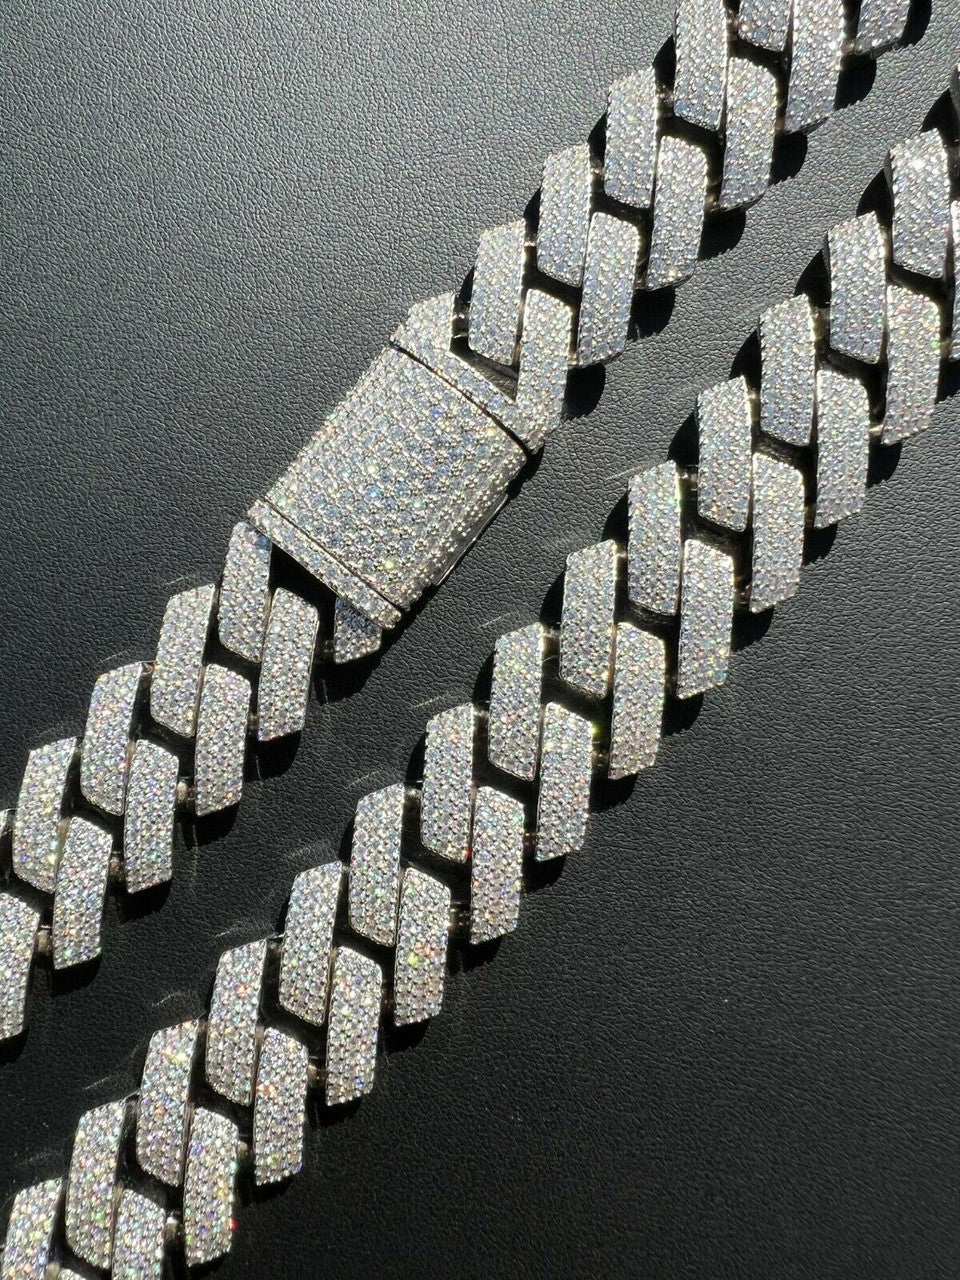 22mm White Gold Iced Prong Miami Cuban Link Chain Vvs Moissanite 925 Sterling Silver Necklace